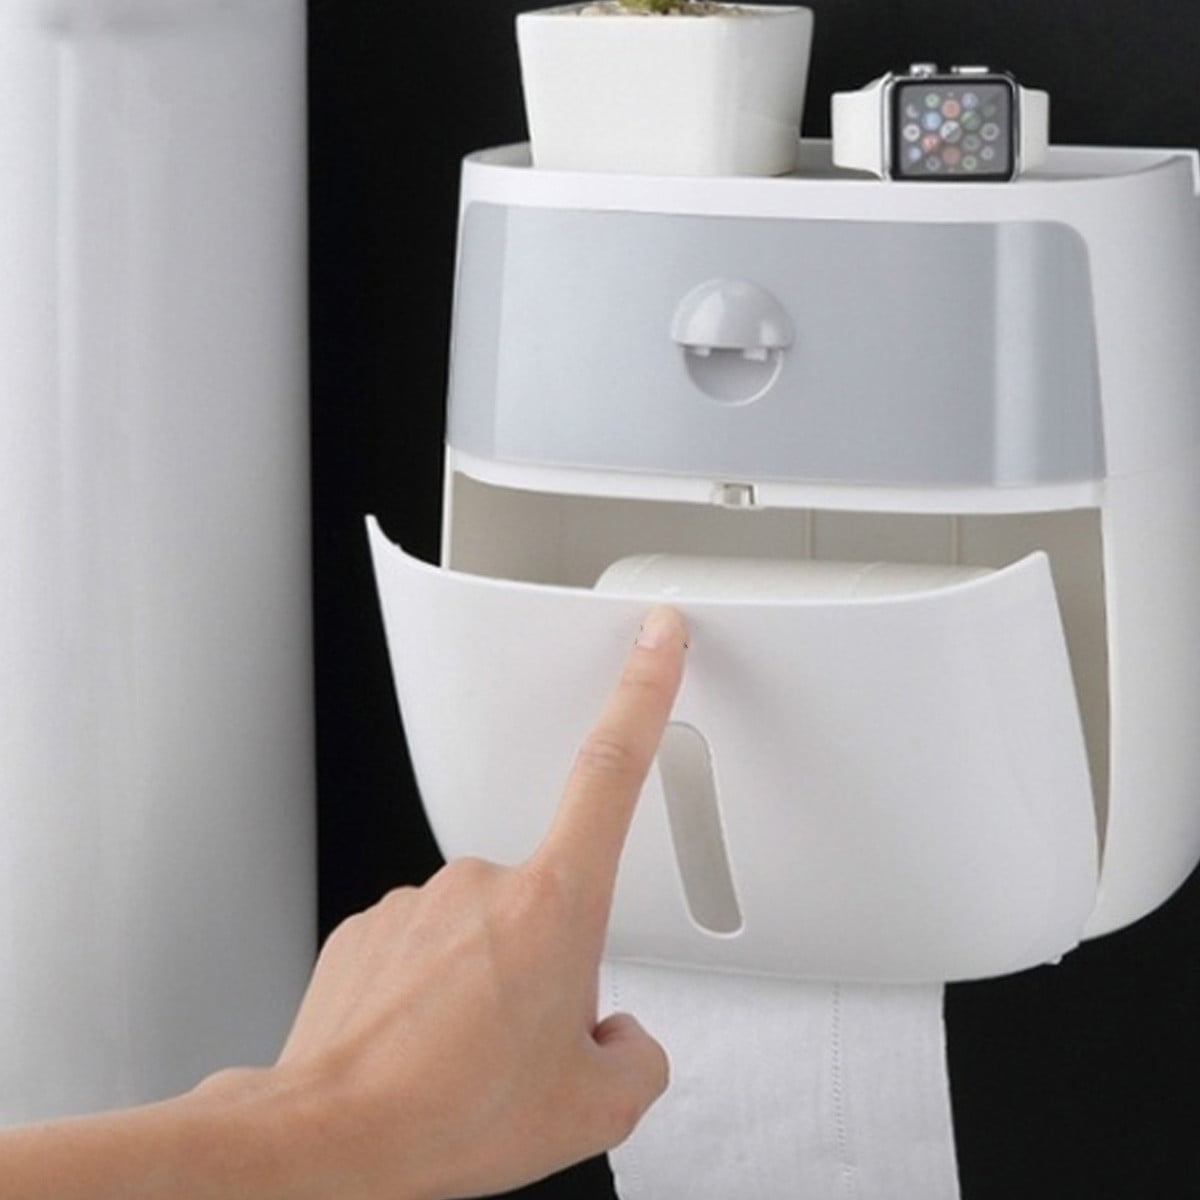 8&amp;#39;&amp;#39; Wall-Mounted Bathroom Paper Towel Dispenser Double Hole No Trace Tissues Box Holder